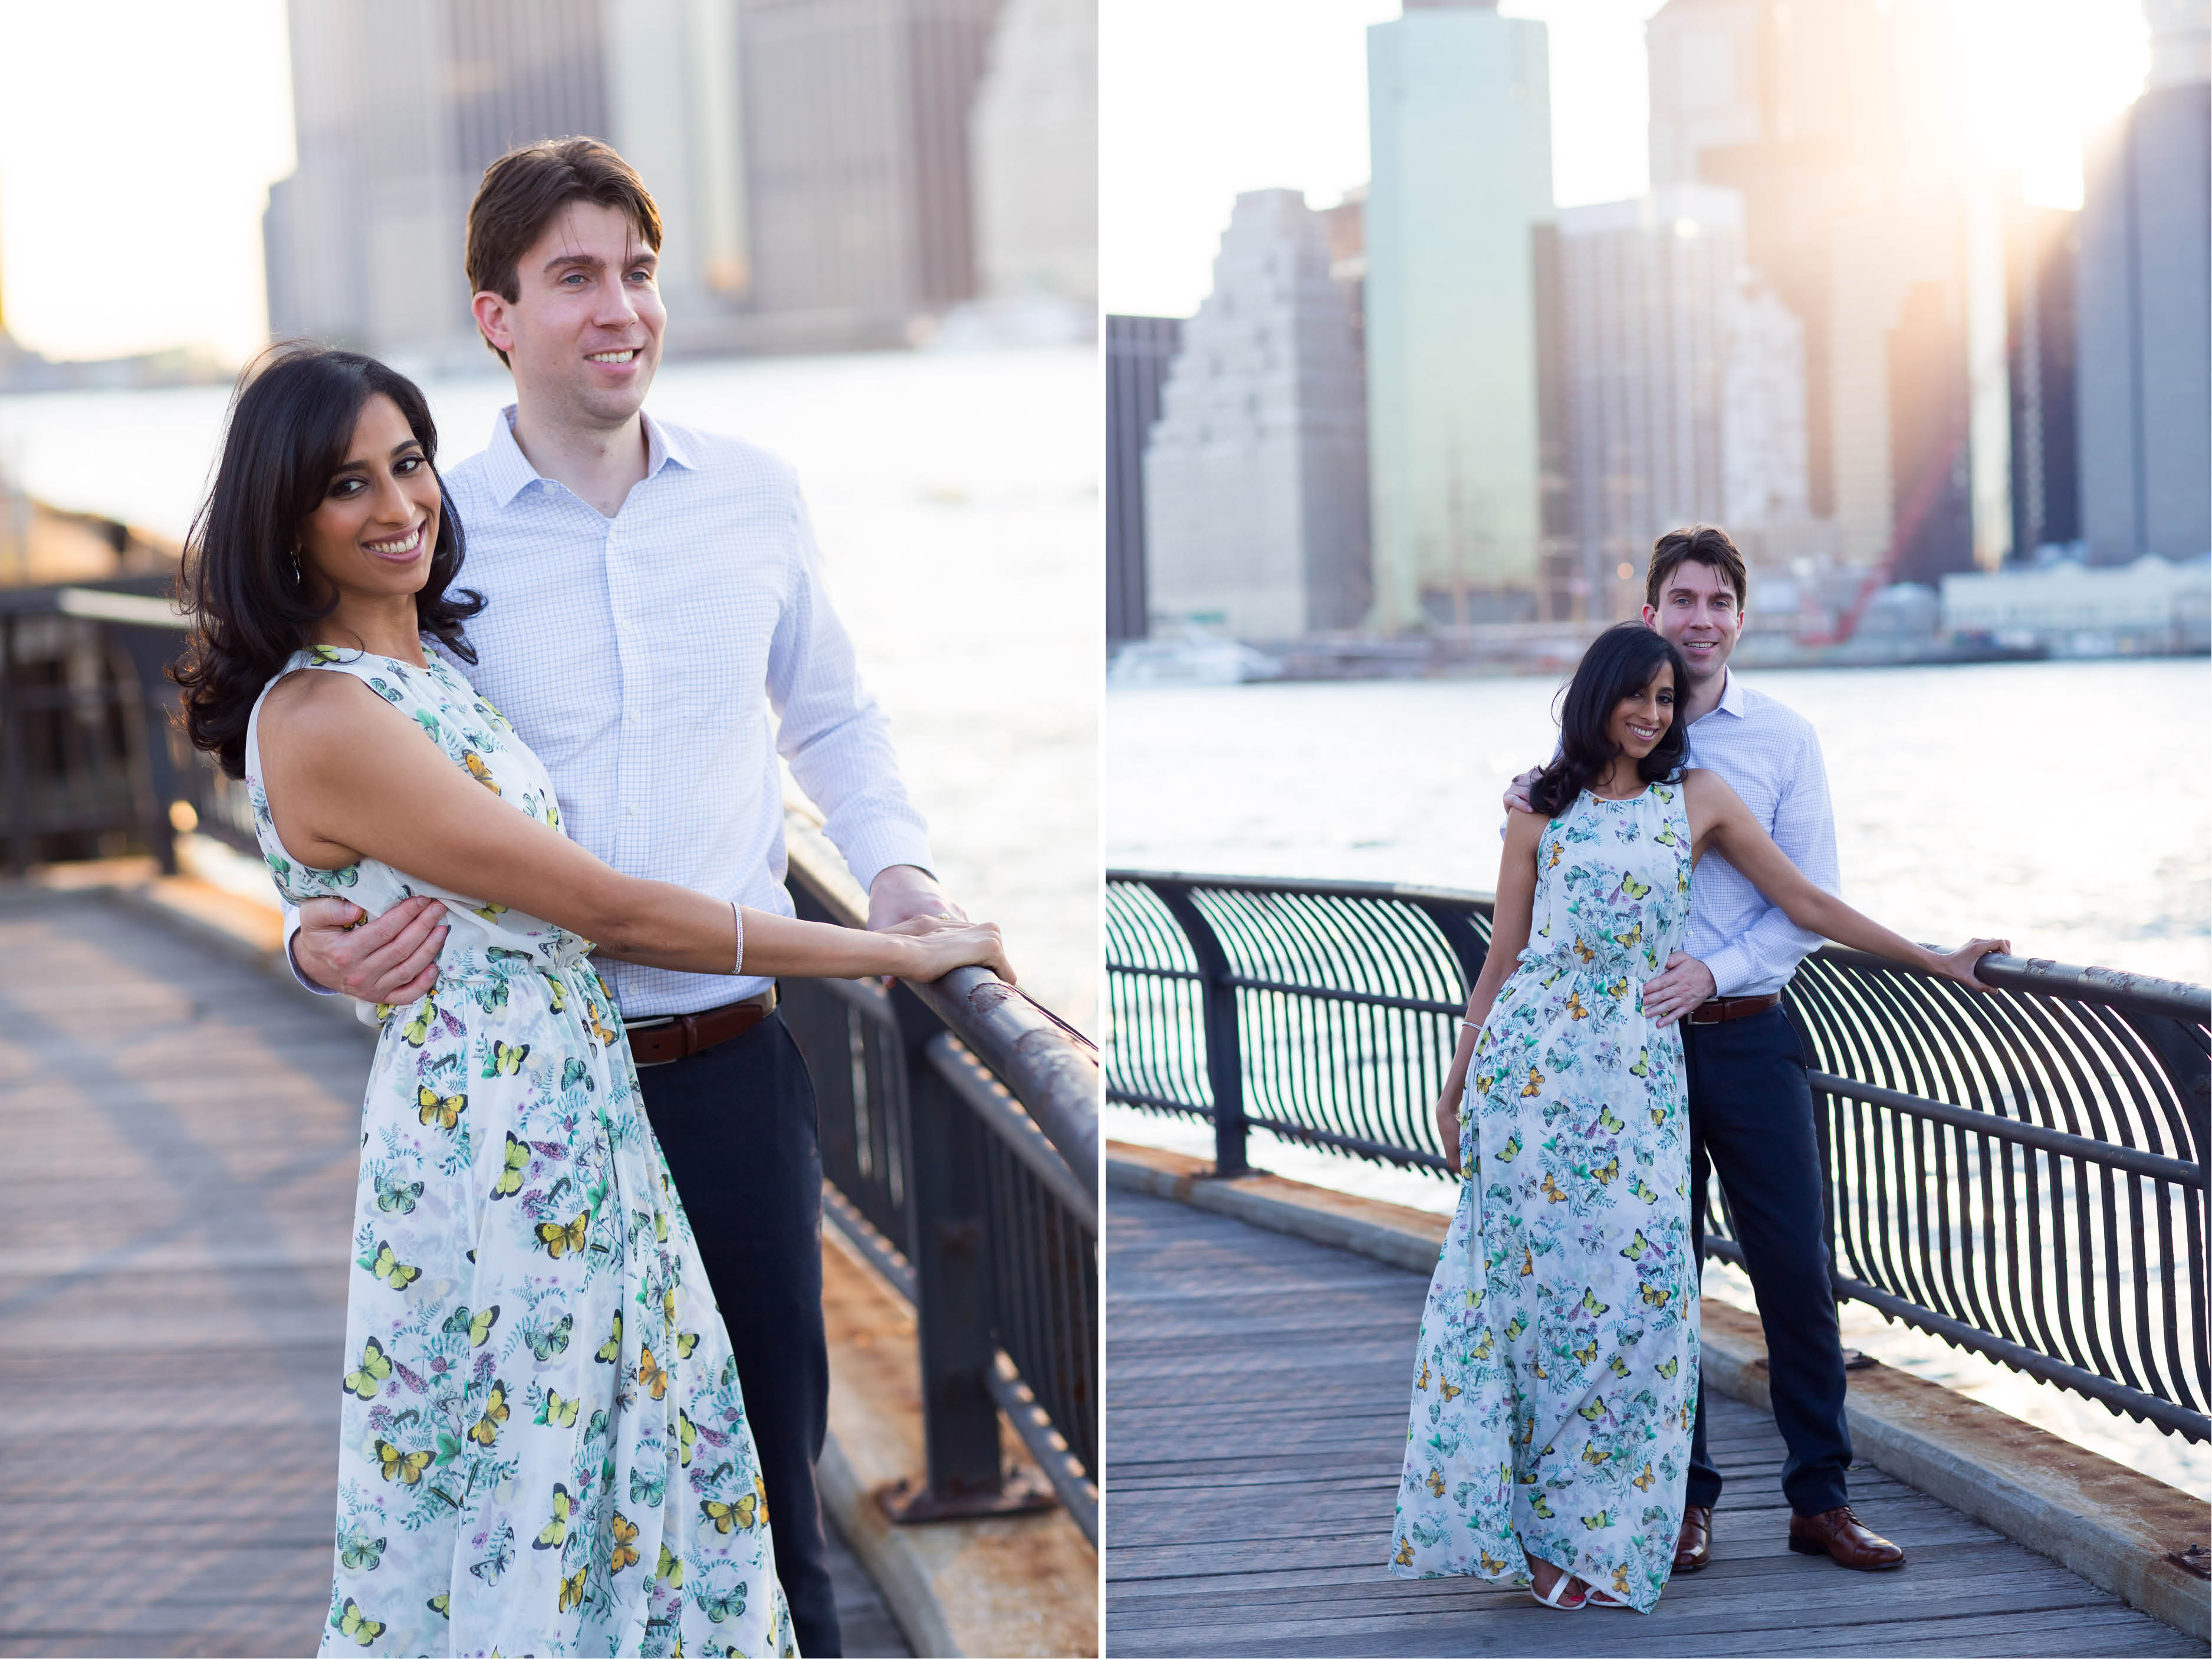 Emma_cleary_photography dumbo engagement12